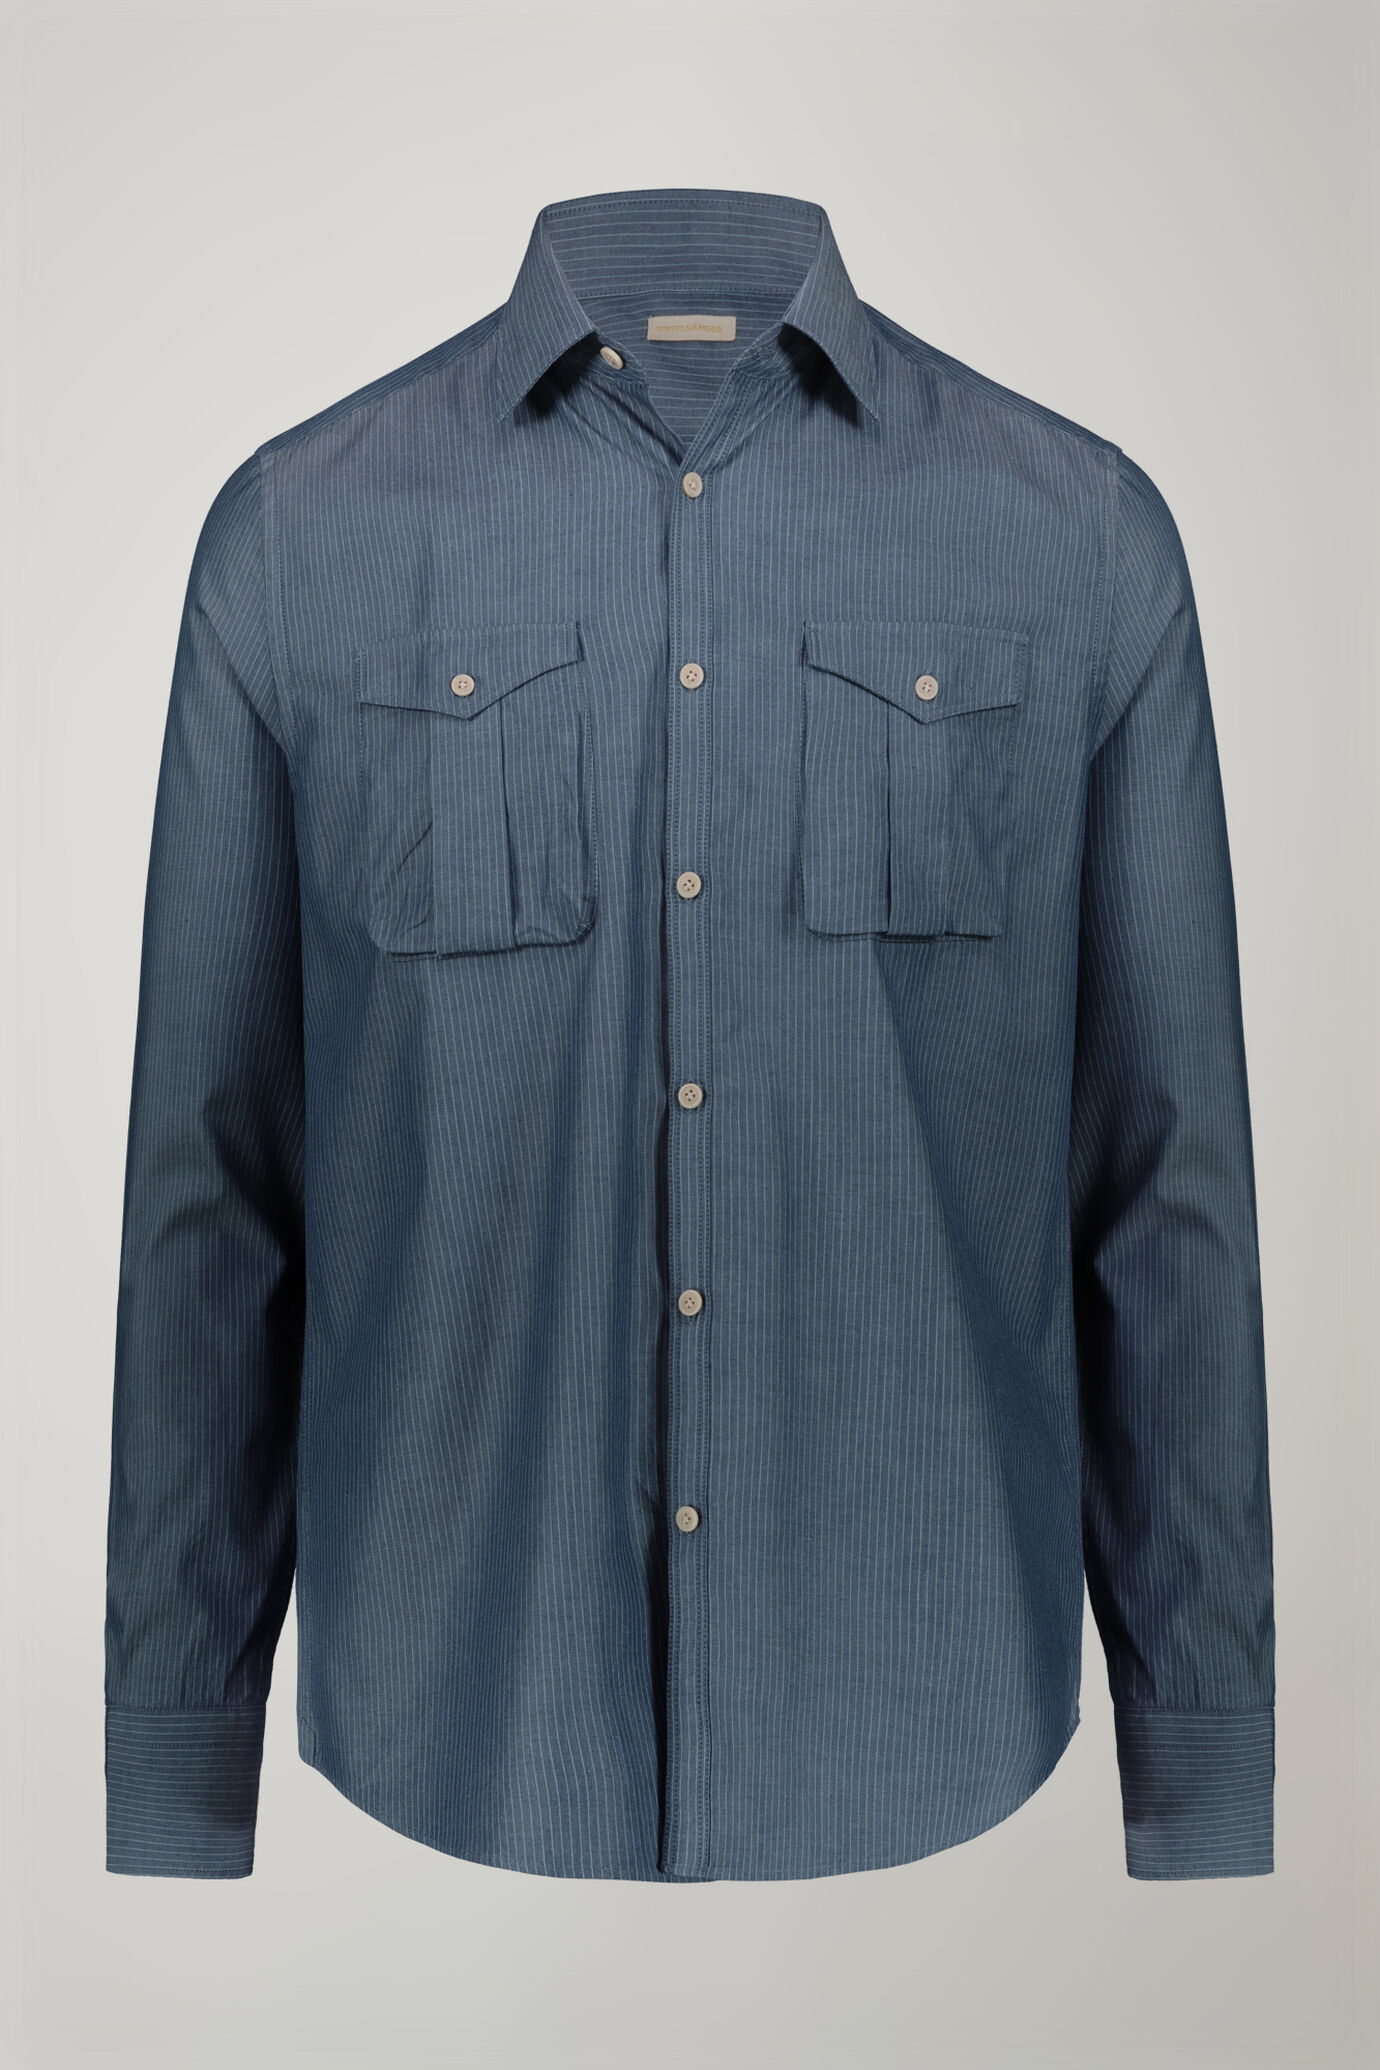 Men’s casual shirt with classic collar 100% cotton pinstriped fabric in denim comfort fit image number 5